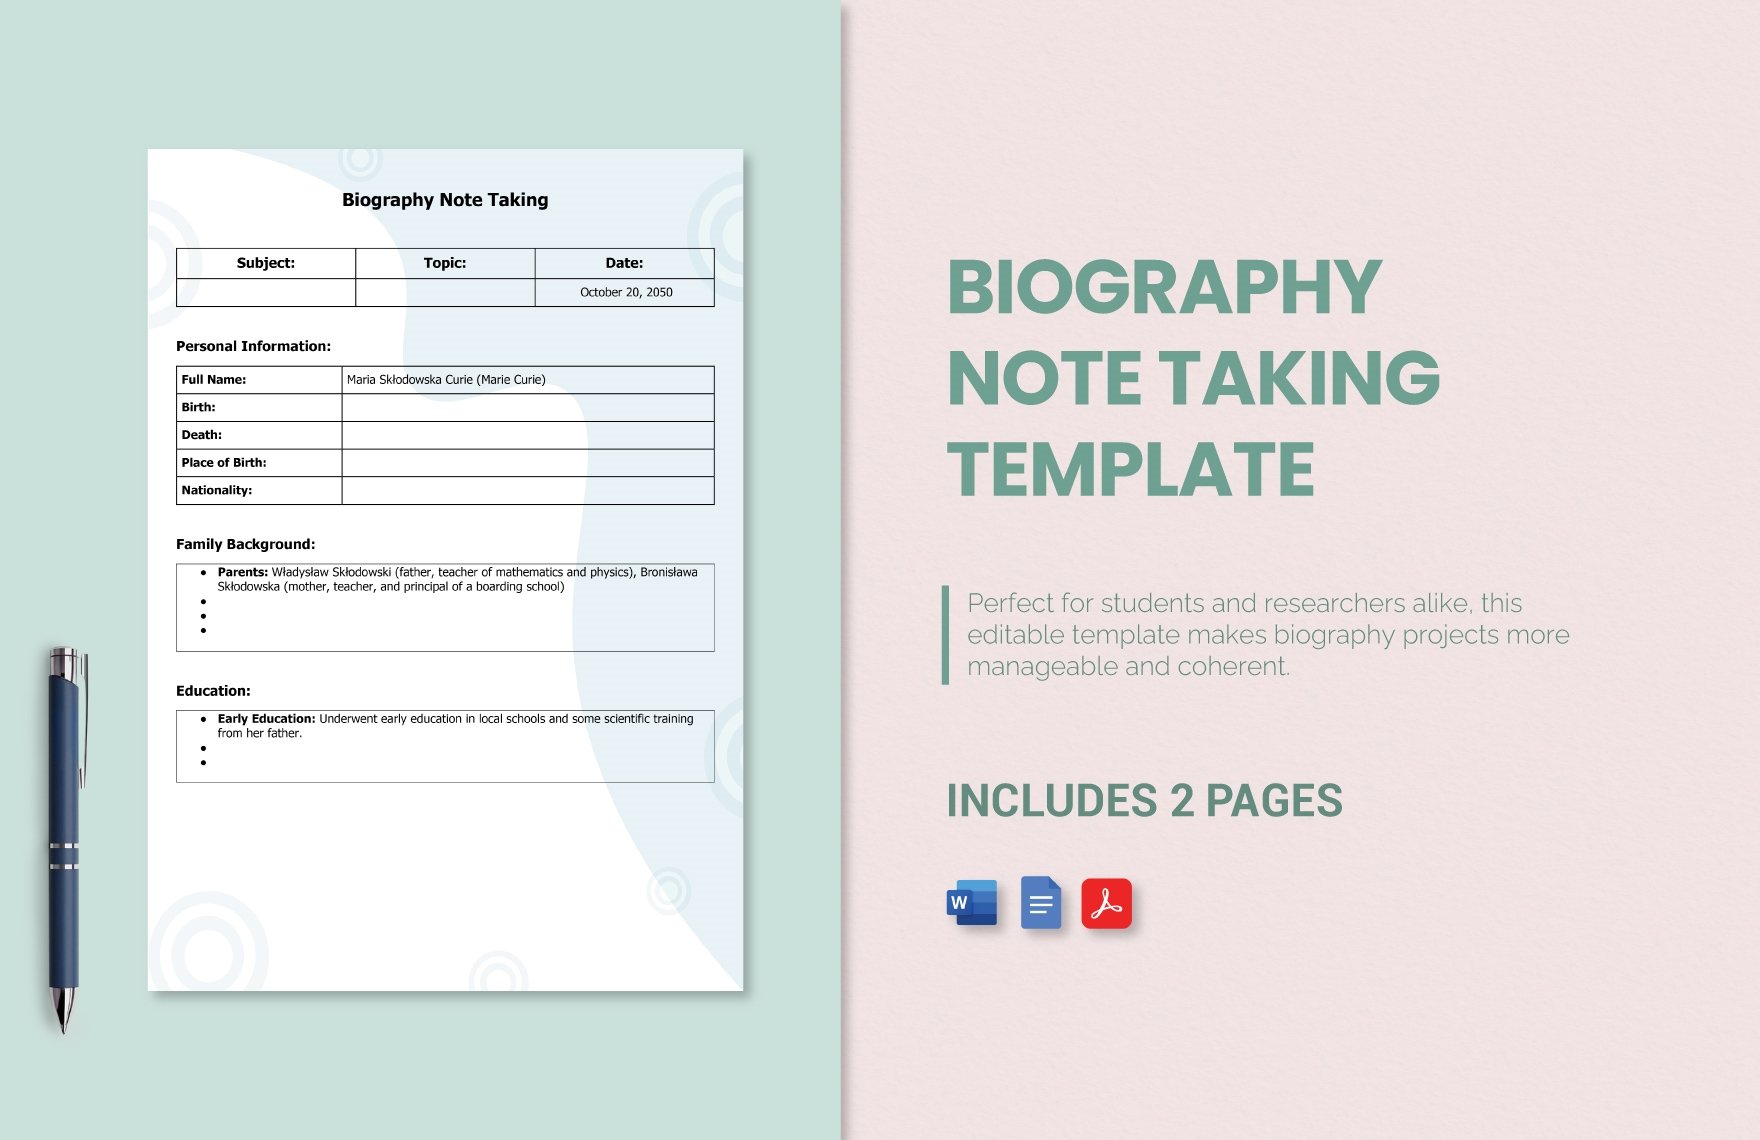 Free Biography Note Taking Template in Word, Google Docs, PDF